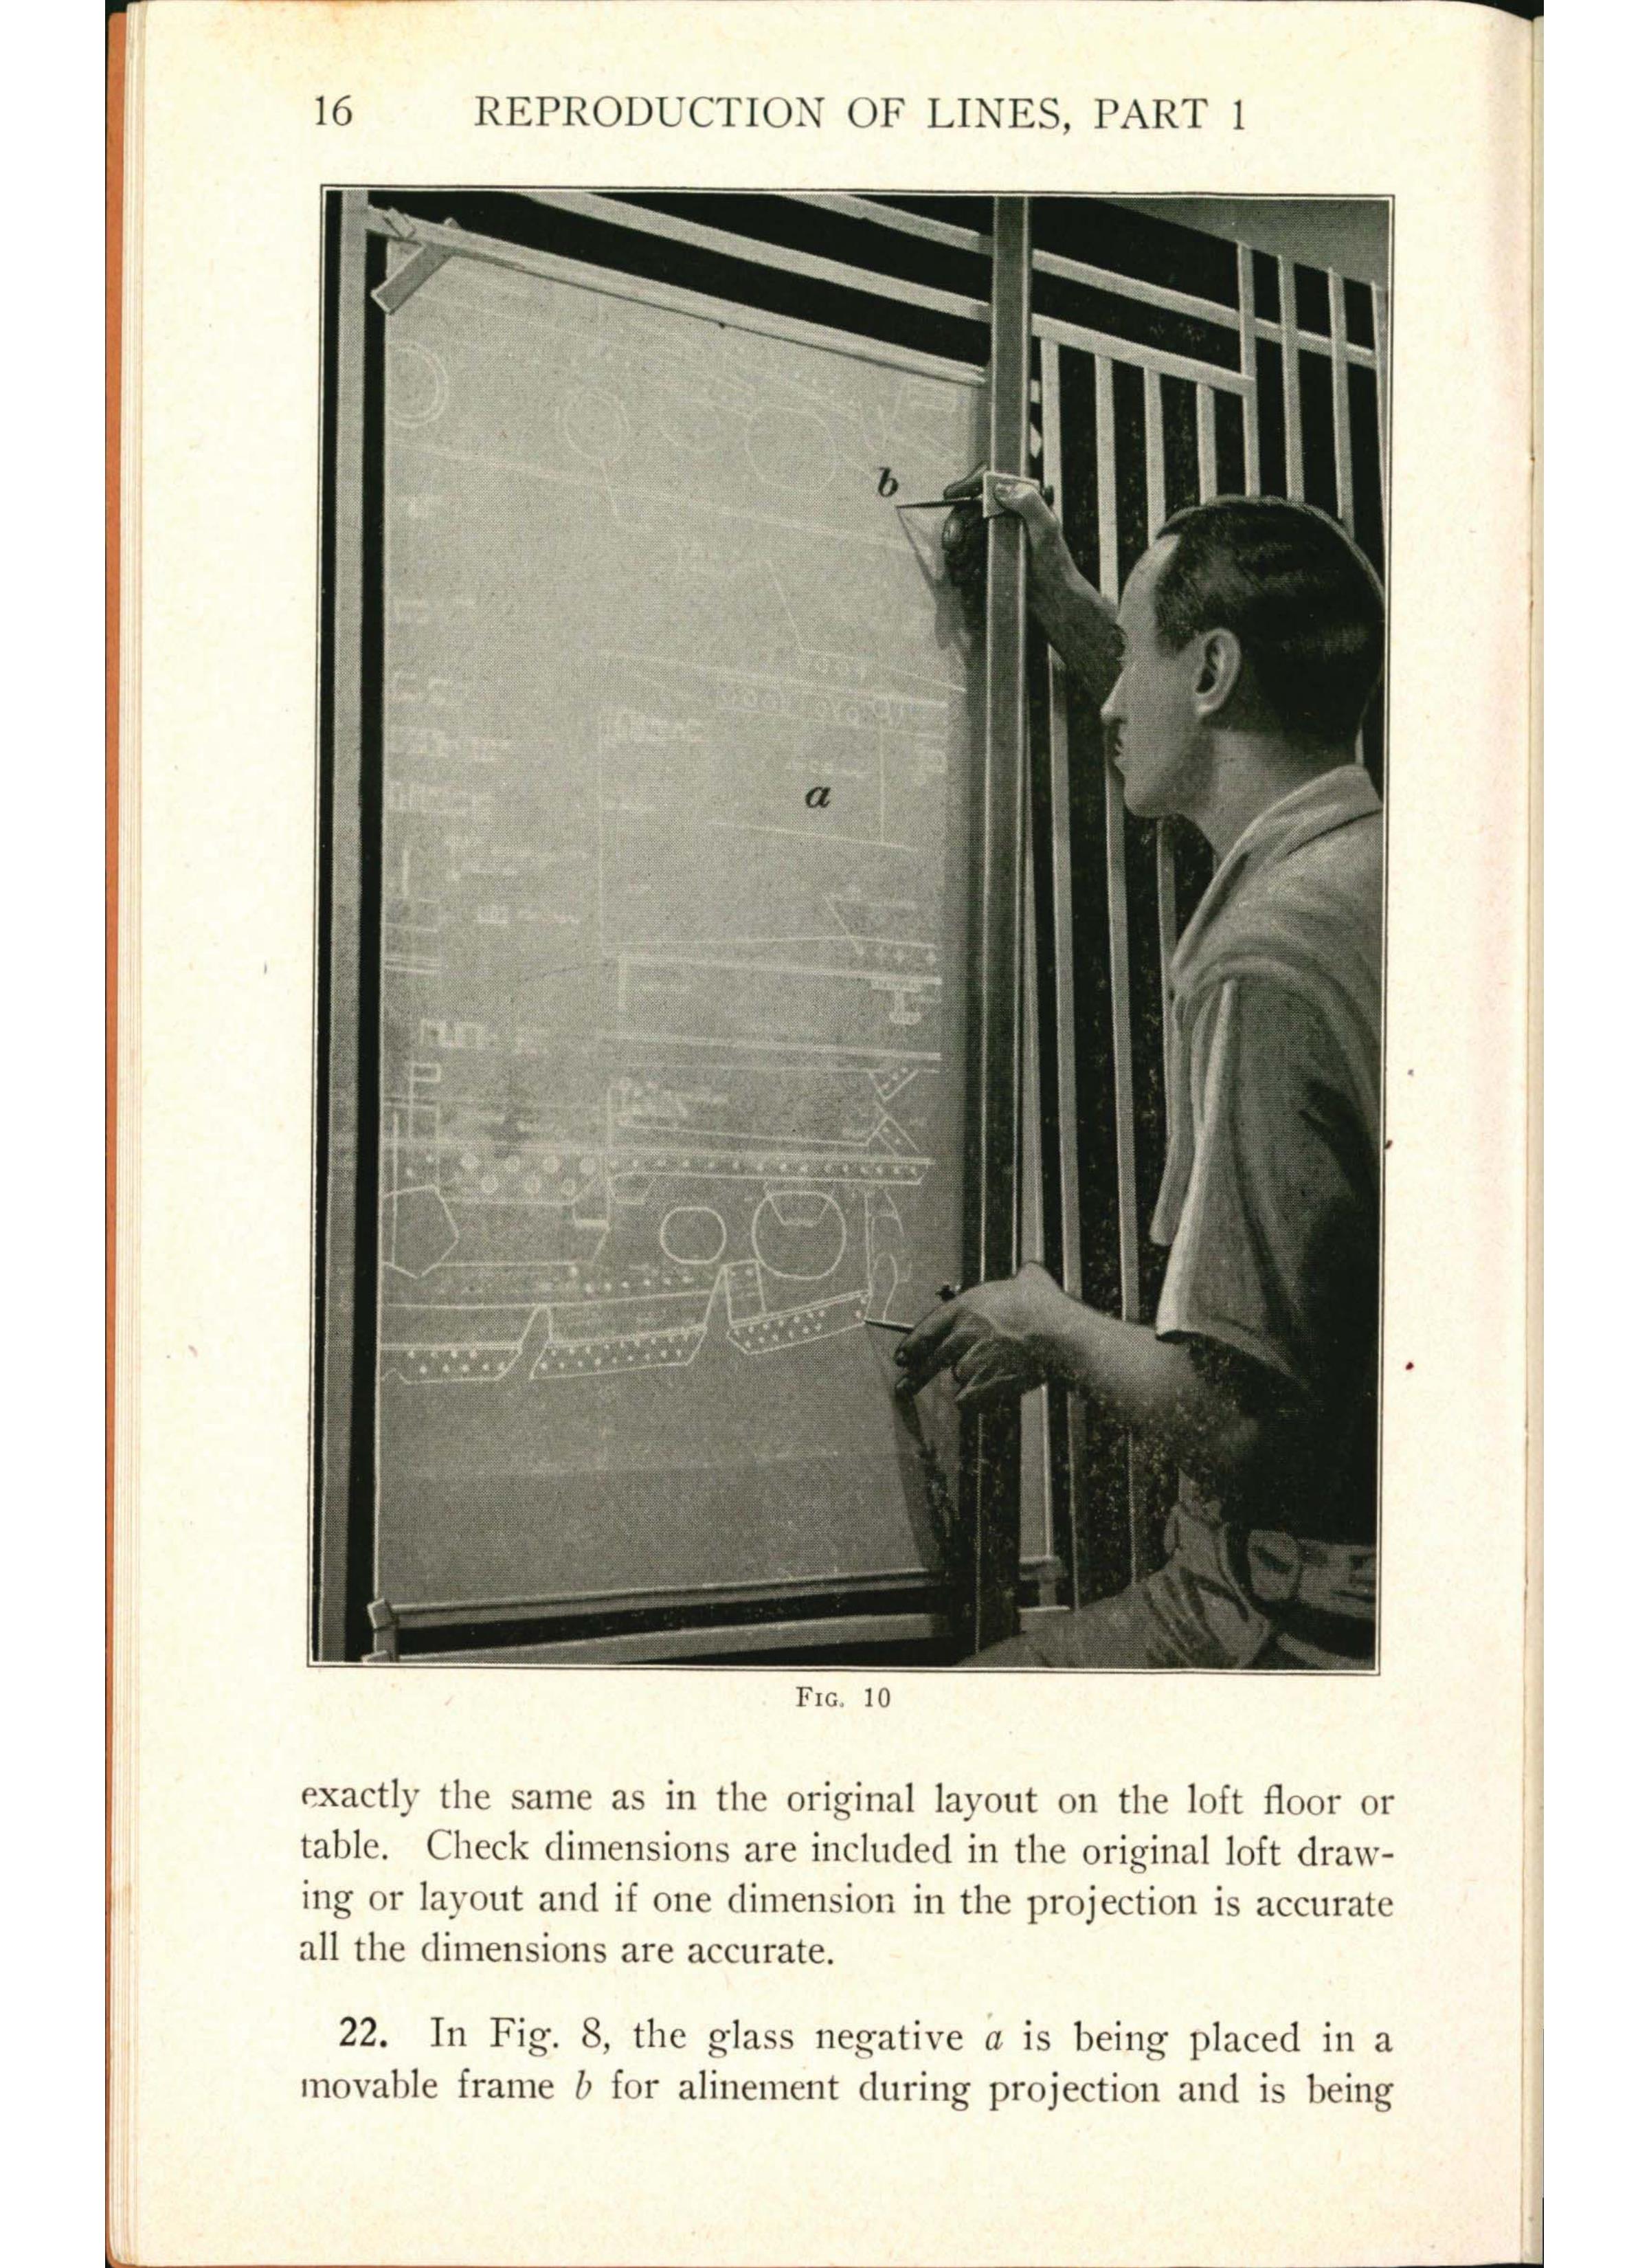 Sample page 18 from AirCorps Library document: Templets and Layout - Reproduction of Lines Part 1 - Bureau of Aeronautics